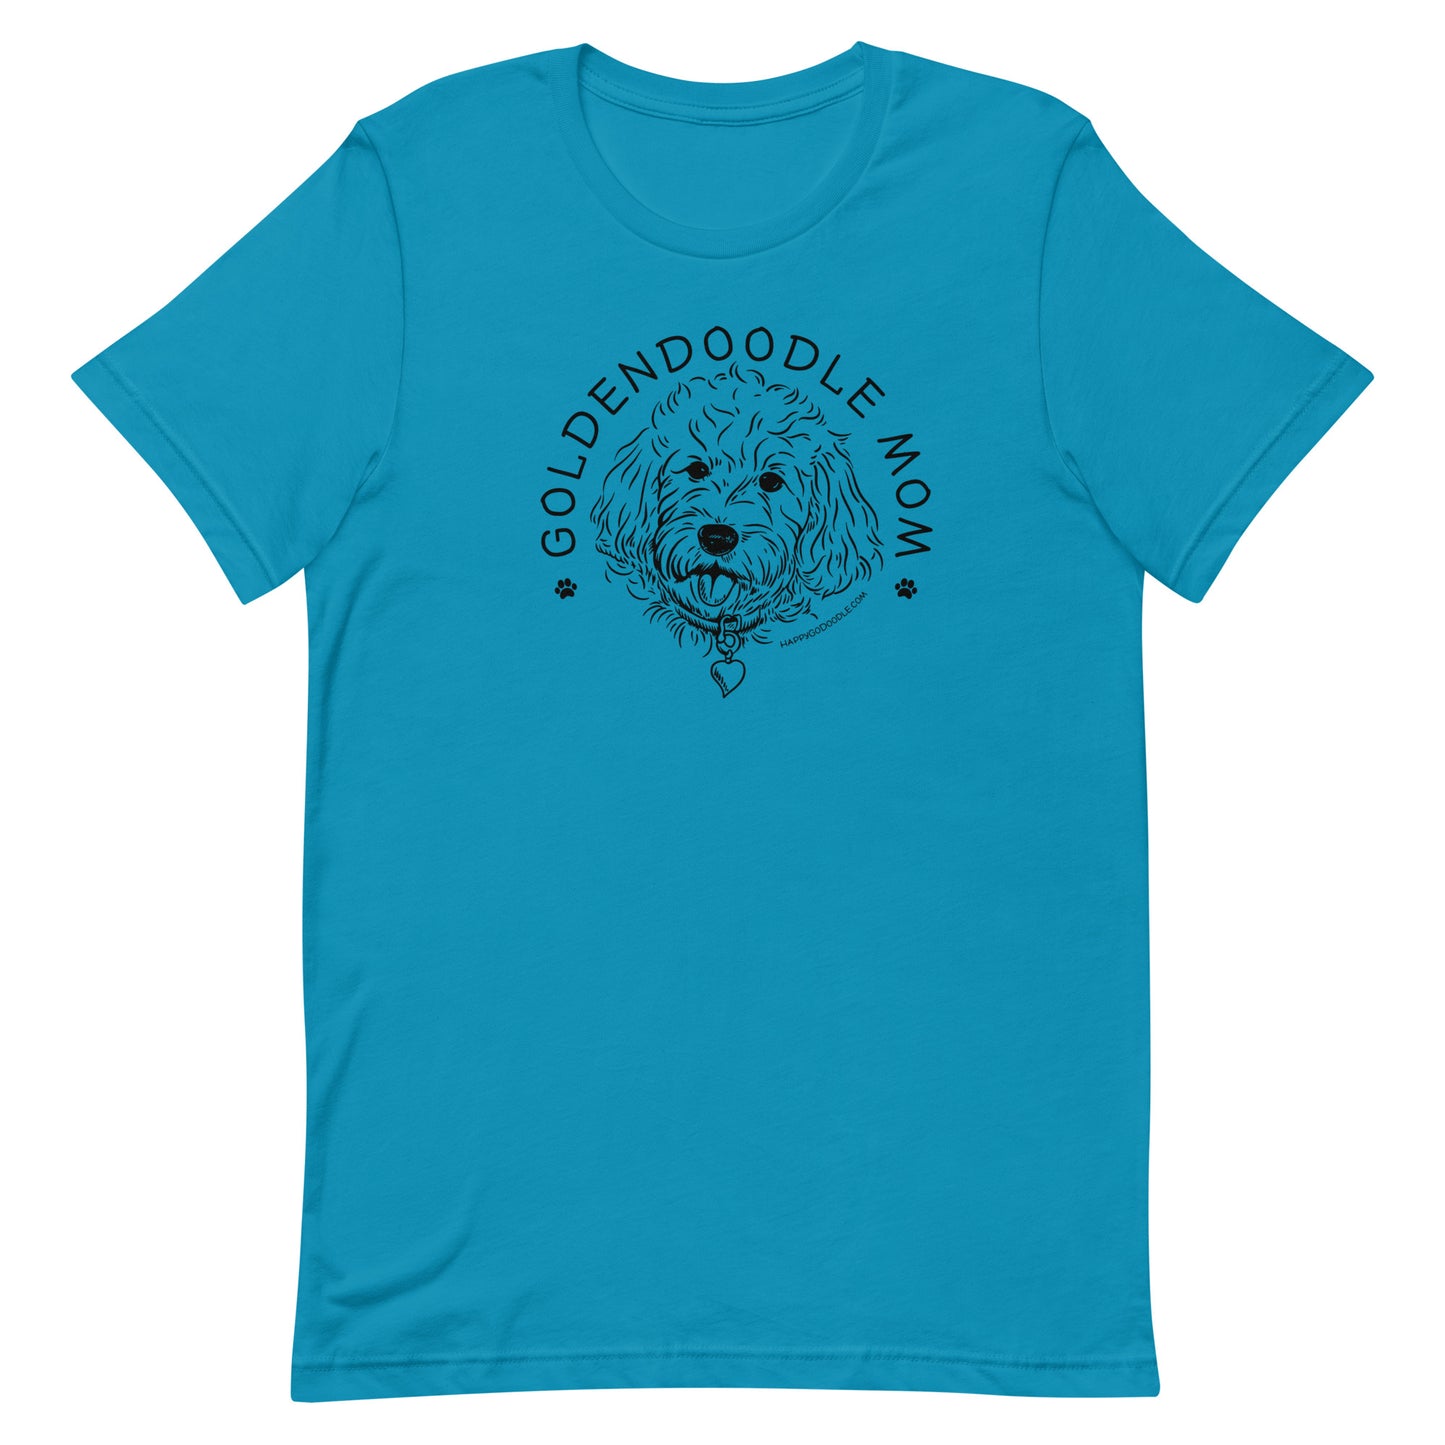 Goldendoodle Mom t-shirt with Goldendoodle face and words "Goldendoodle Mom" in aqua  color